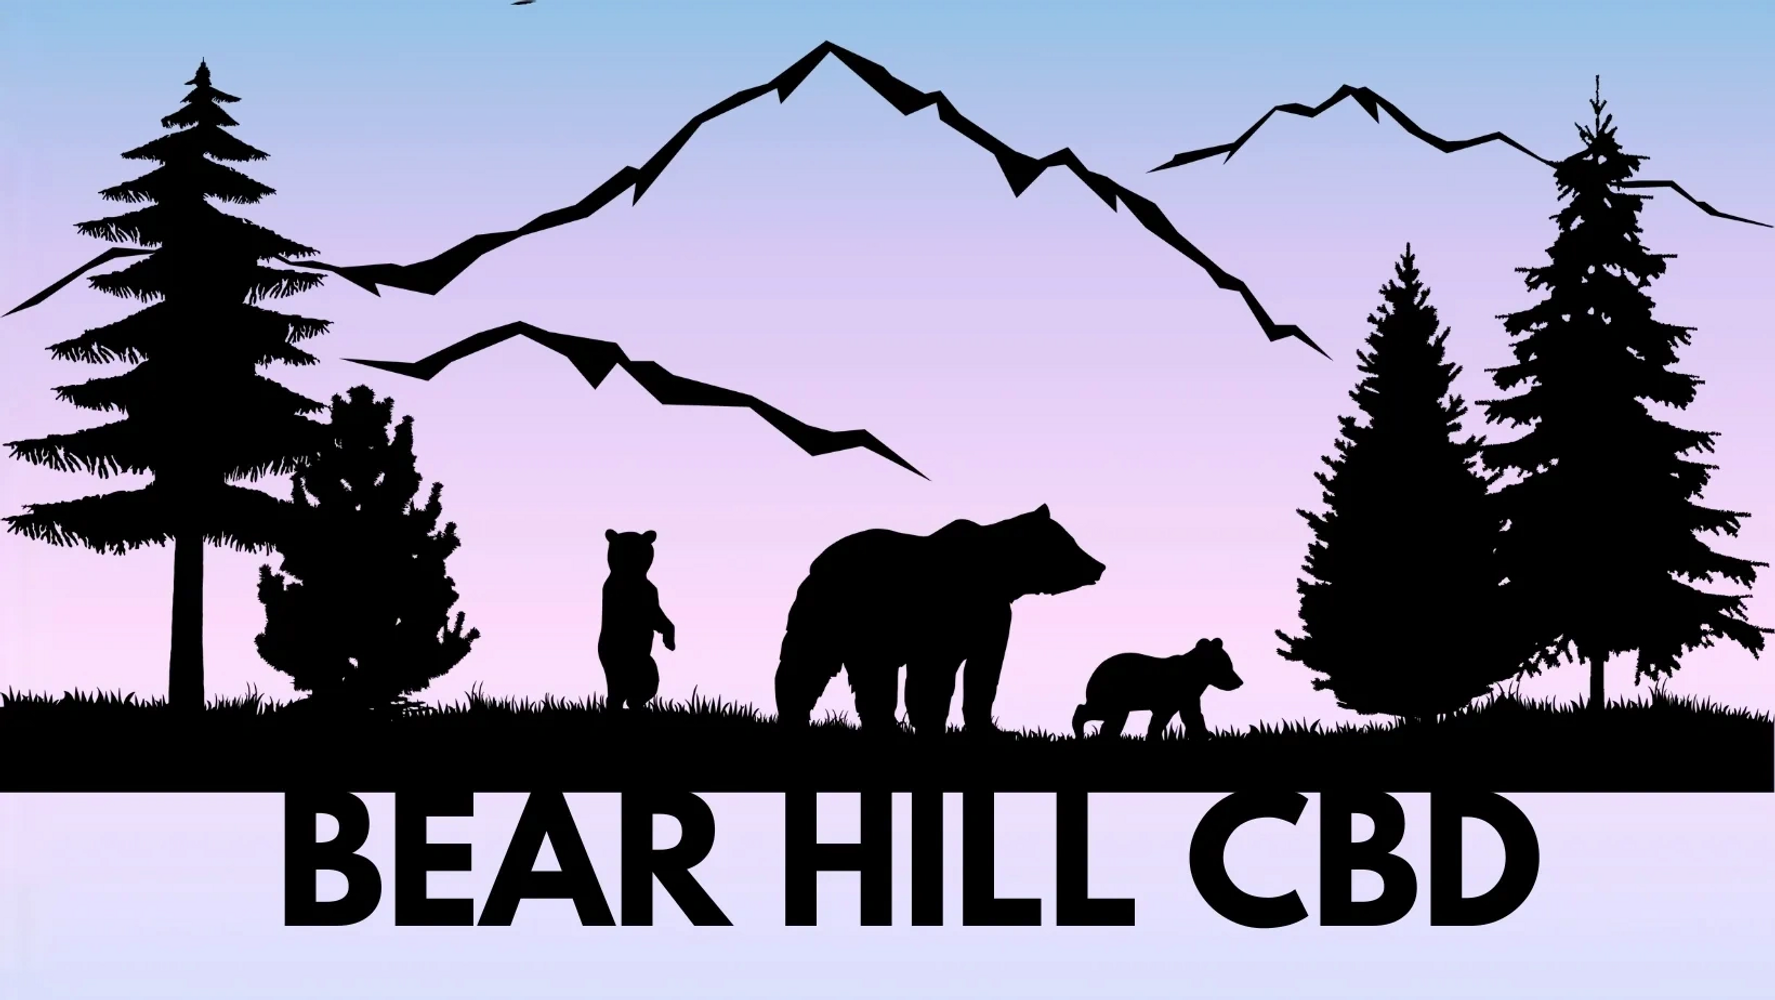 Bear Hill CBD is a grower of hemp products and producer of quality salves and tinctures in Dalton NH